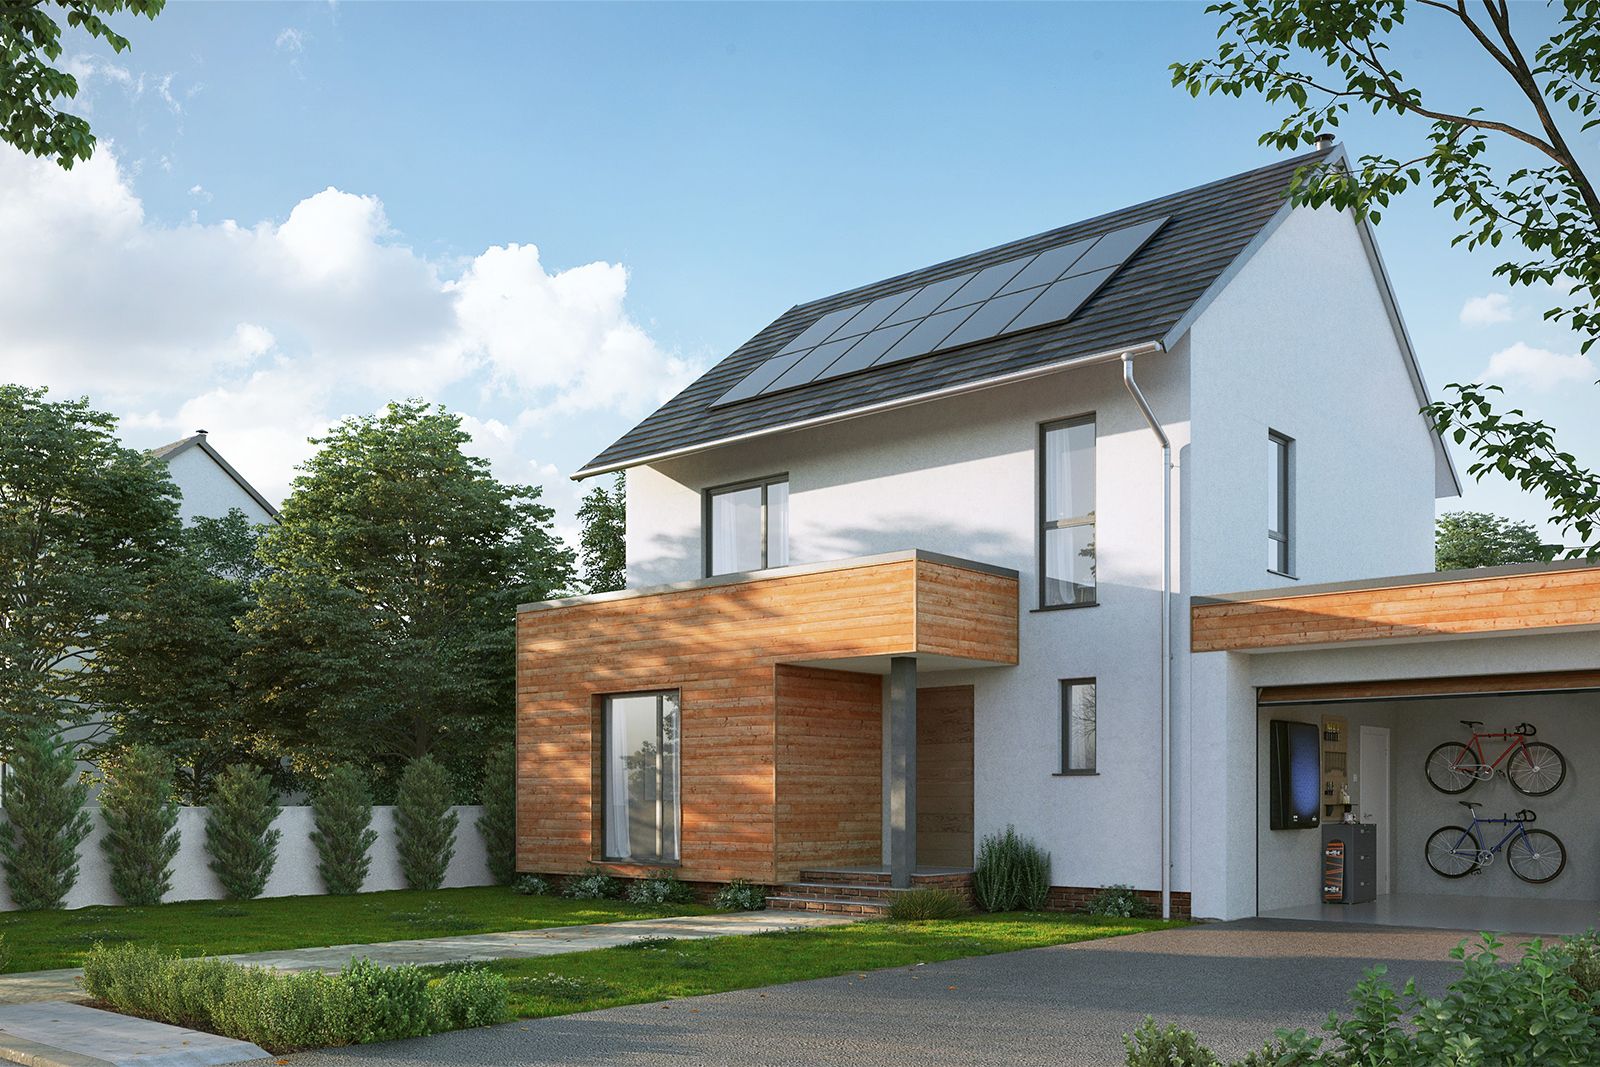 Nissan Energy Solar is an all-in-one solar panel power management system for homes image 1